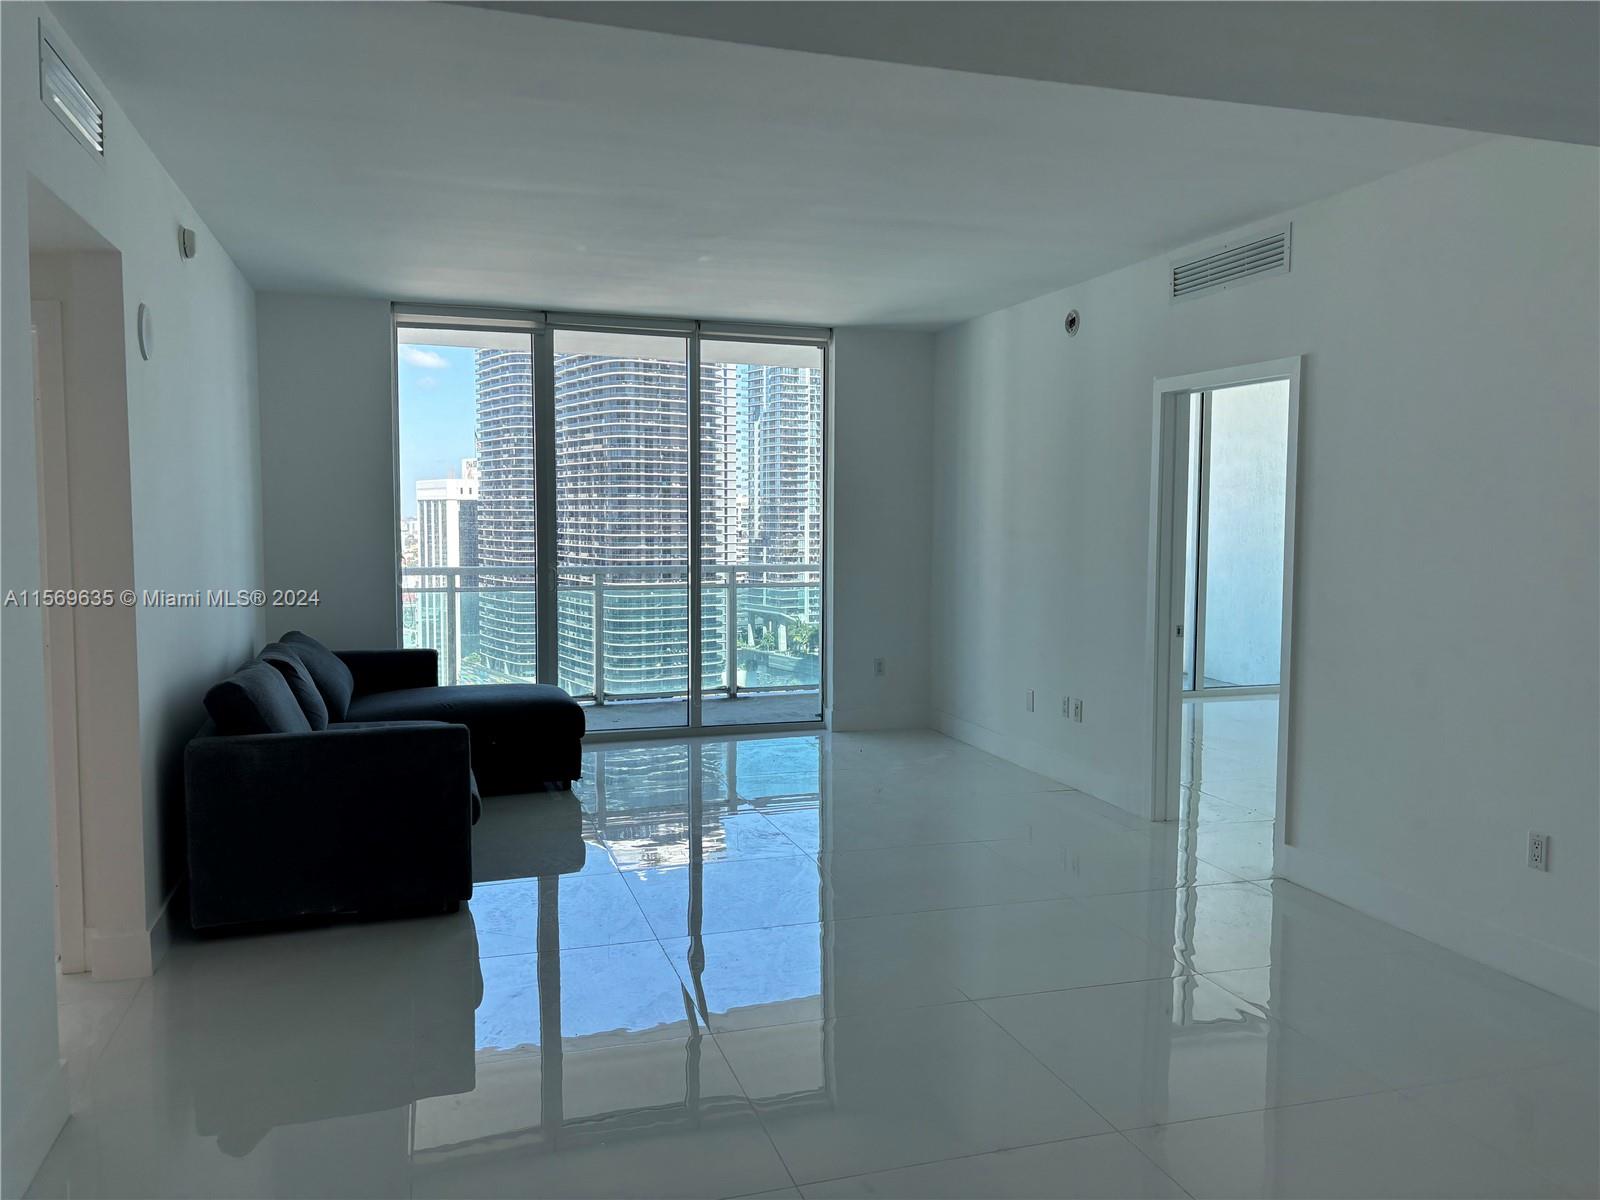 The perfect Miami Brickell area 2 bed/ 2 bath. Recently renovated, high ceilings, gorgeous new floors and luxury finishes. Views of the City & Sunset & skyline. Kitchen is modern w/ SS appliances. 24 HR security, concierge and valet, enjoy the state-of-the-art fitness center, the 2 infinity-edge heated pools, Jacuzzi, Theater room, business center, party room w/ pool table & lounge. Brickell area is full of life and energy. Walk to Miami's best Art, Restaurants, Nightlife and markets.